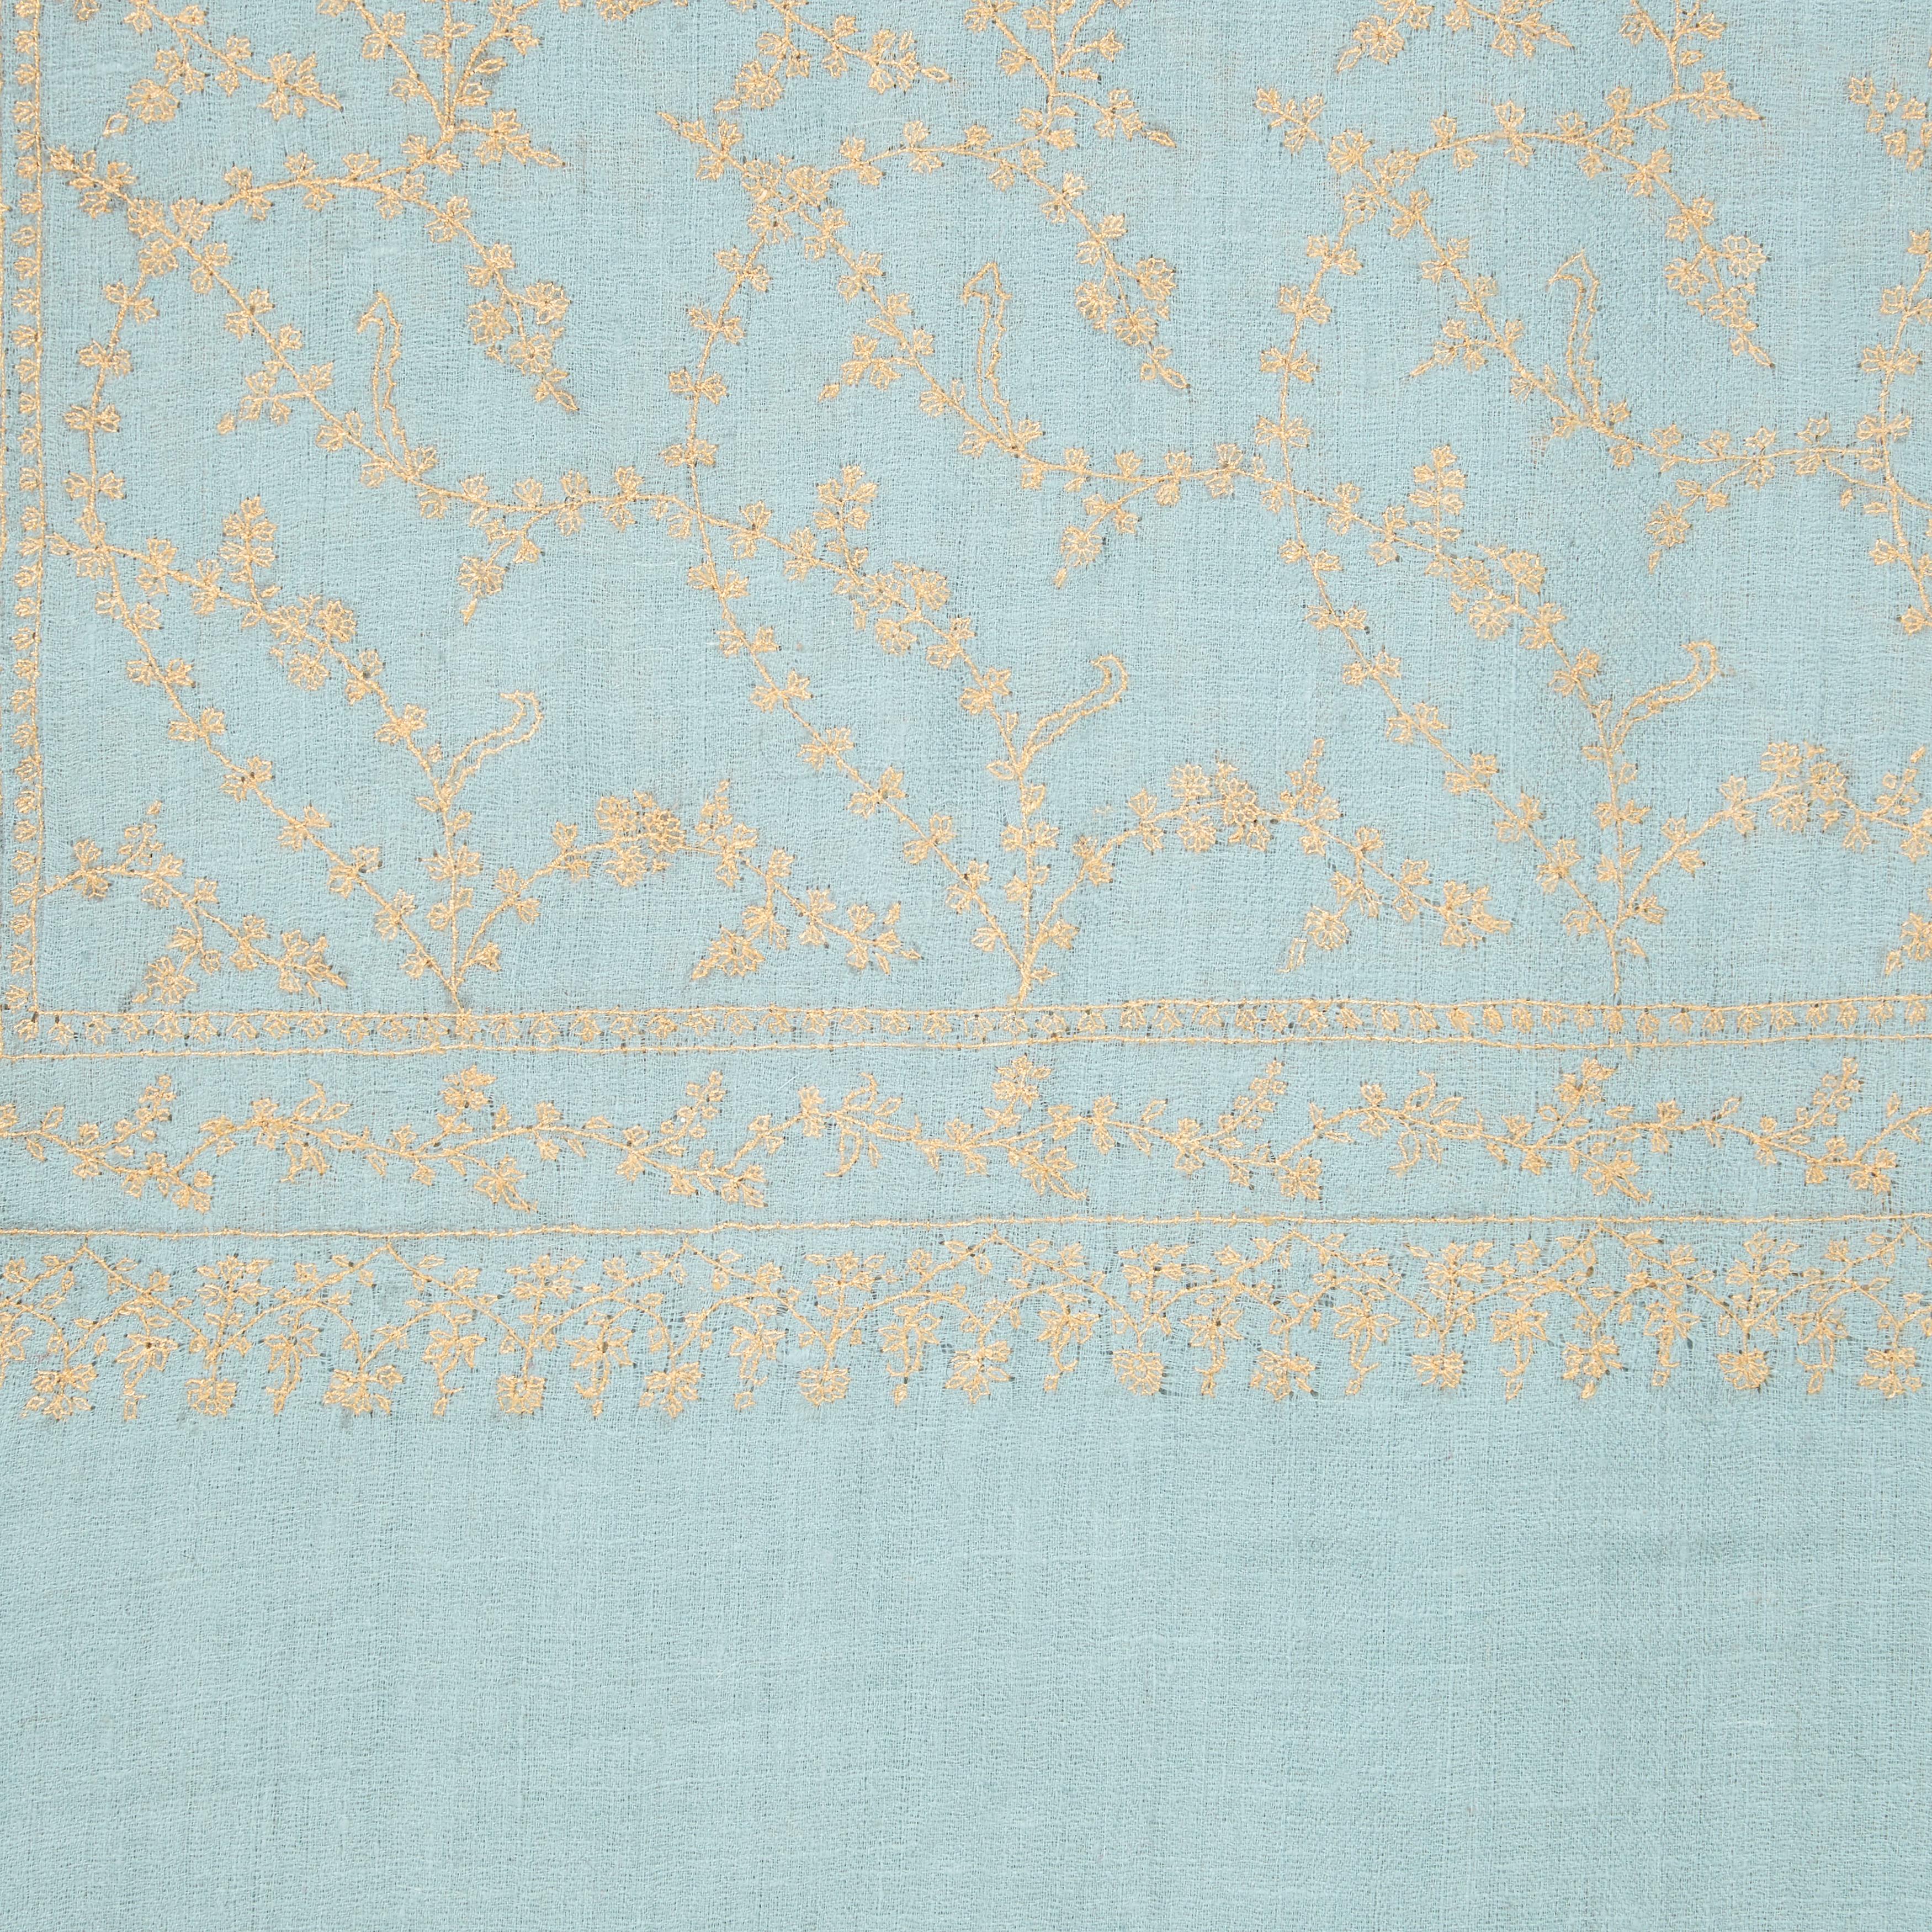 Hand Embroidered 100% Cashmere Shawl in Pale Blue & Gold Made in Kashmir - Gift (Grau)